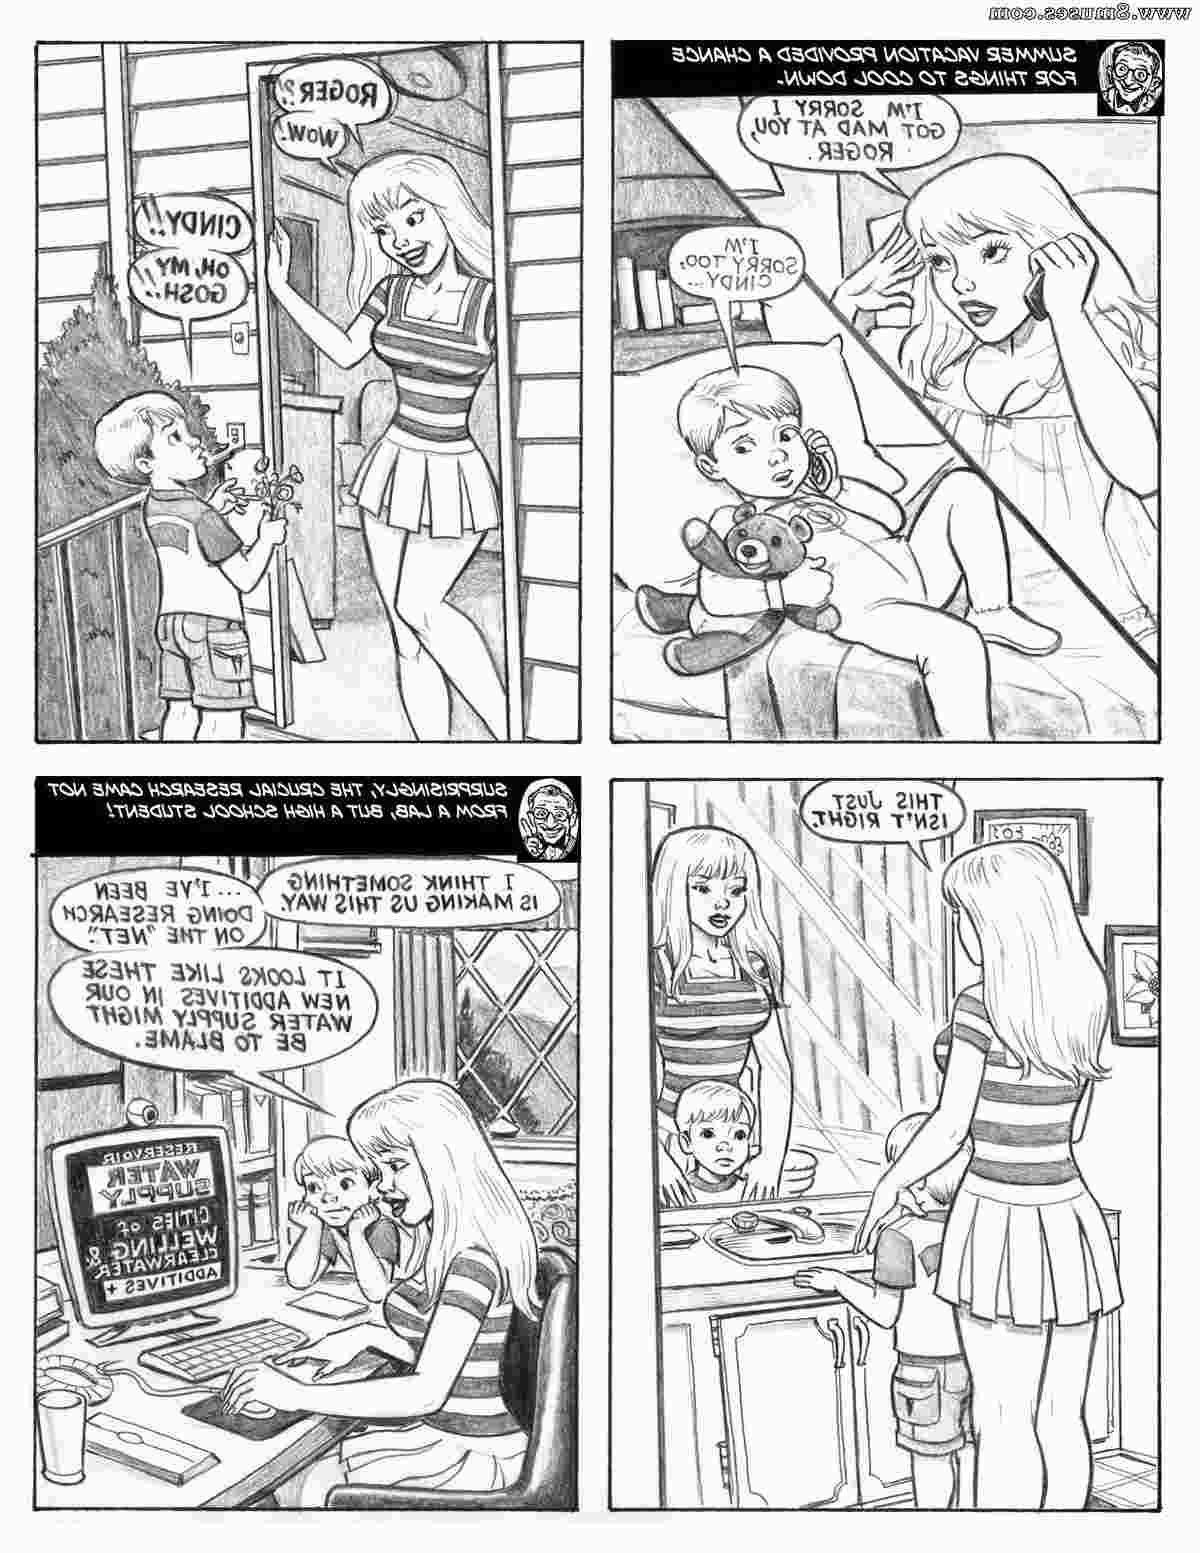 DreamTales-Comics/Something-in-The-Water Something_in_The_Water__8muses_-_Sex_and_Porn_Comics_19.jpg